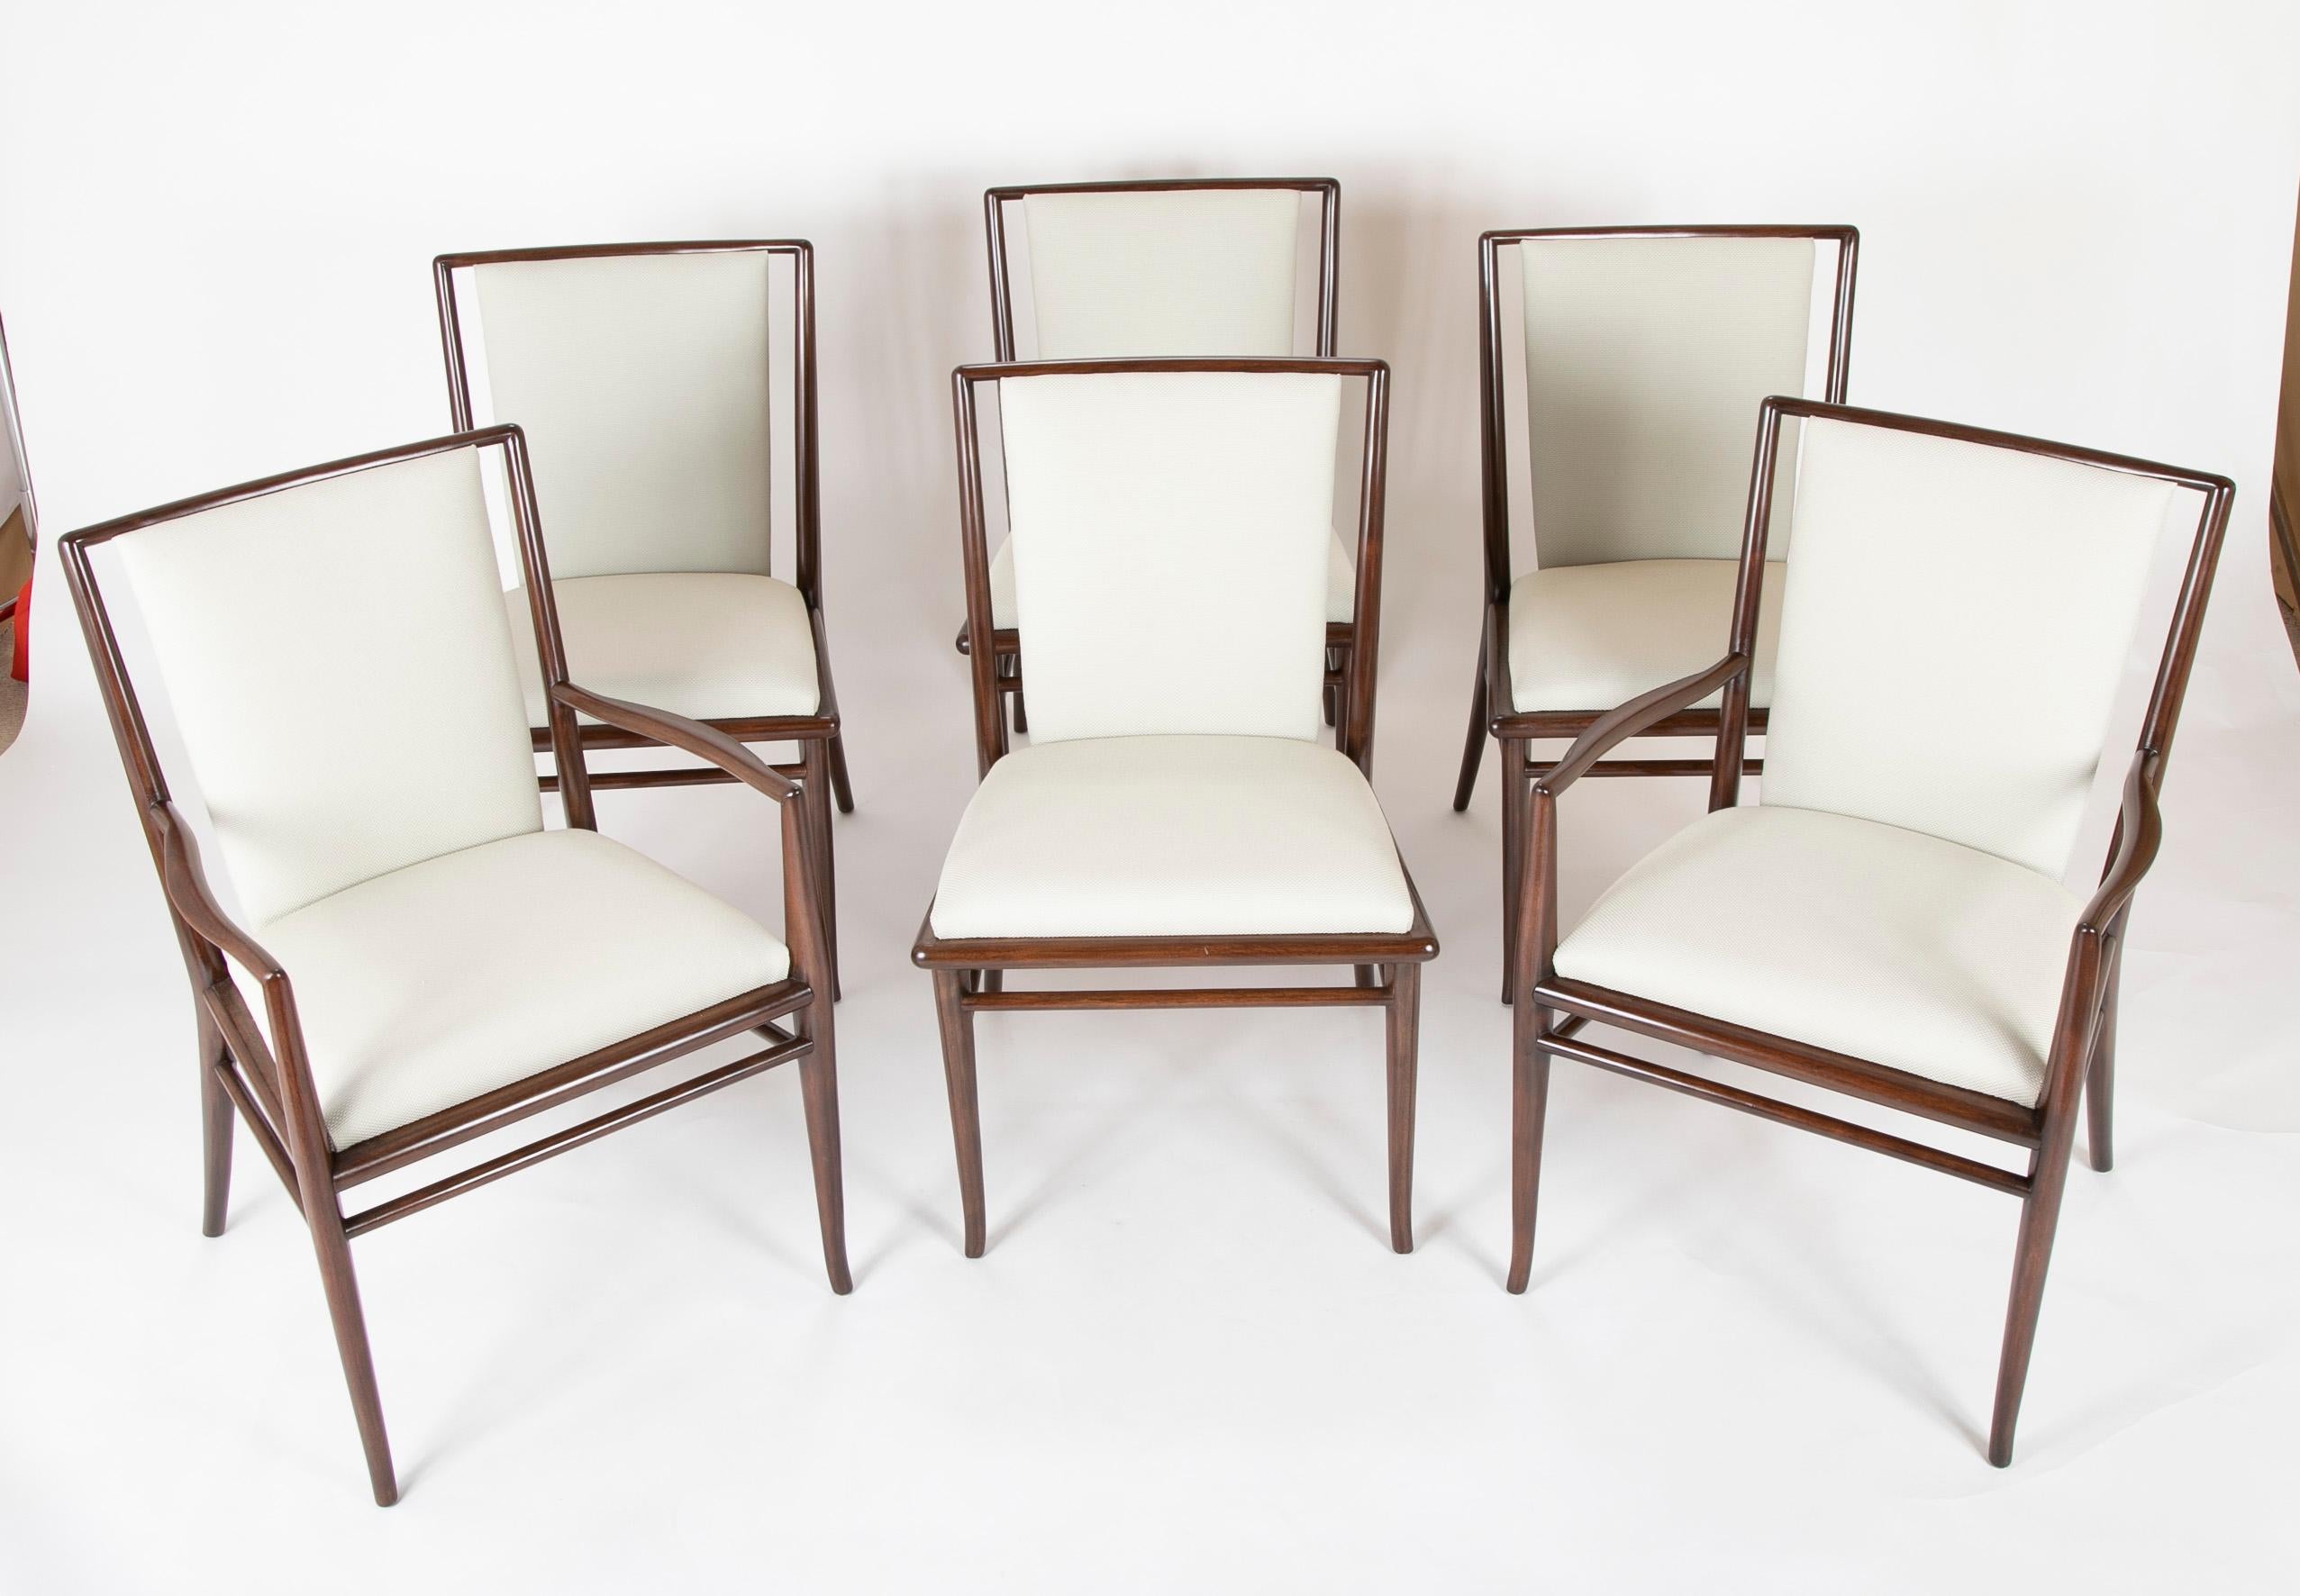 Set of six Robsjohn-Gibbings dining chairs in dark walnut stain; two arms and four sides, circa late 1950s-early 1960s. Newly upholstered in Delany and long fabric. Seat height 19